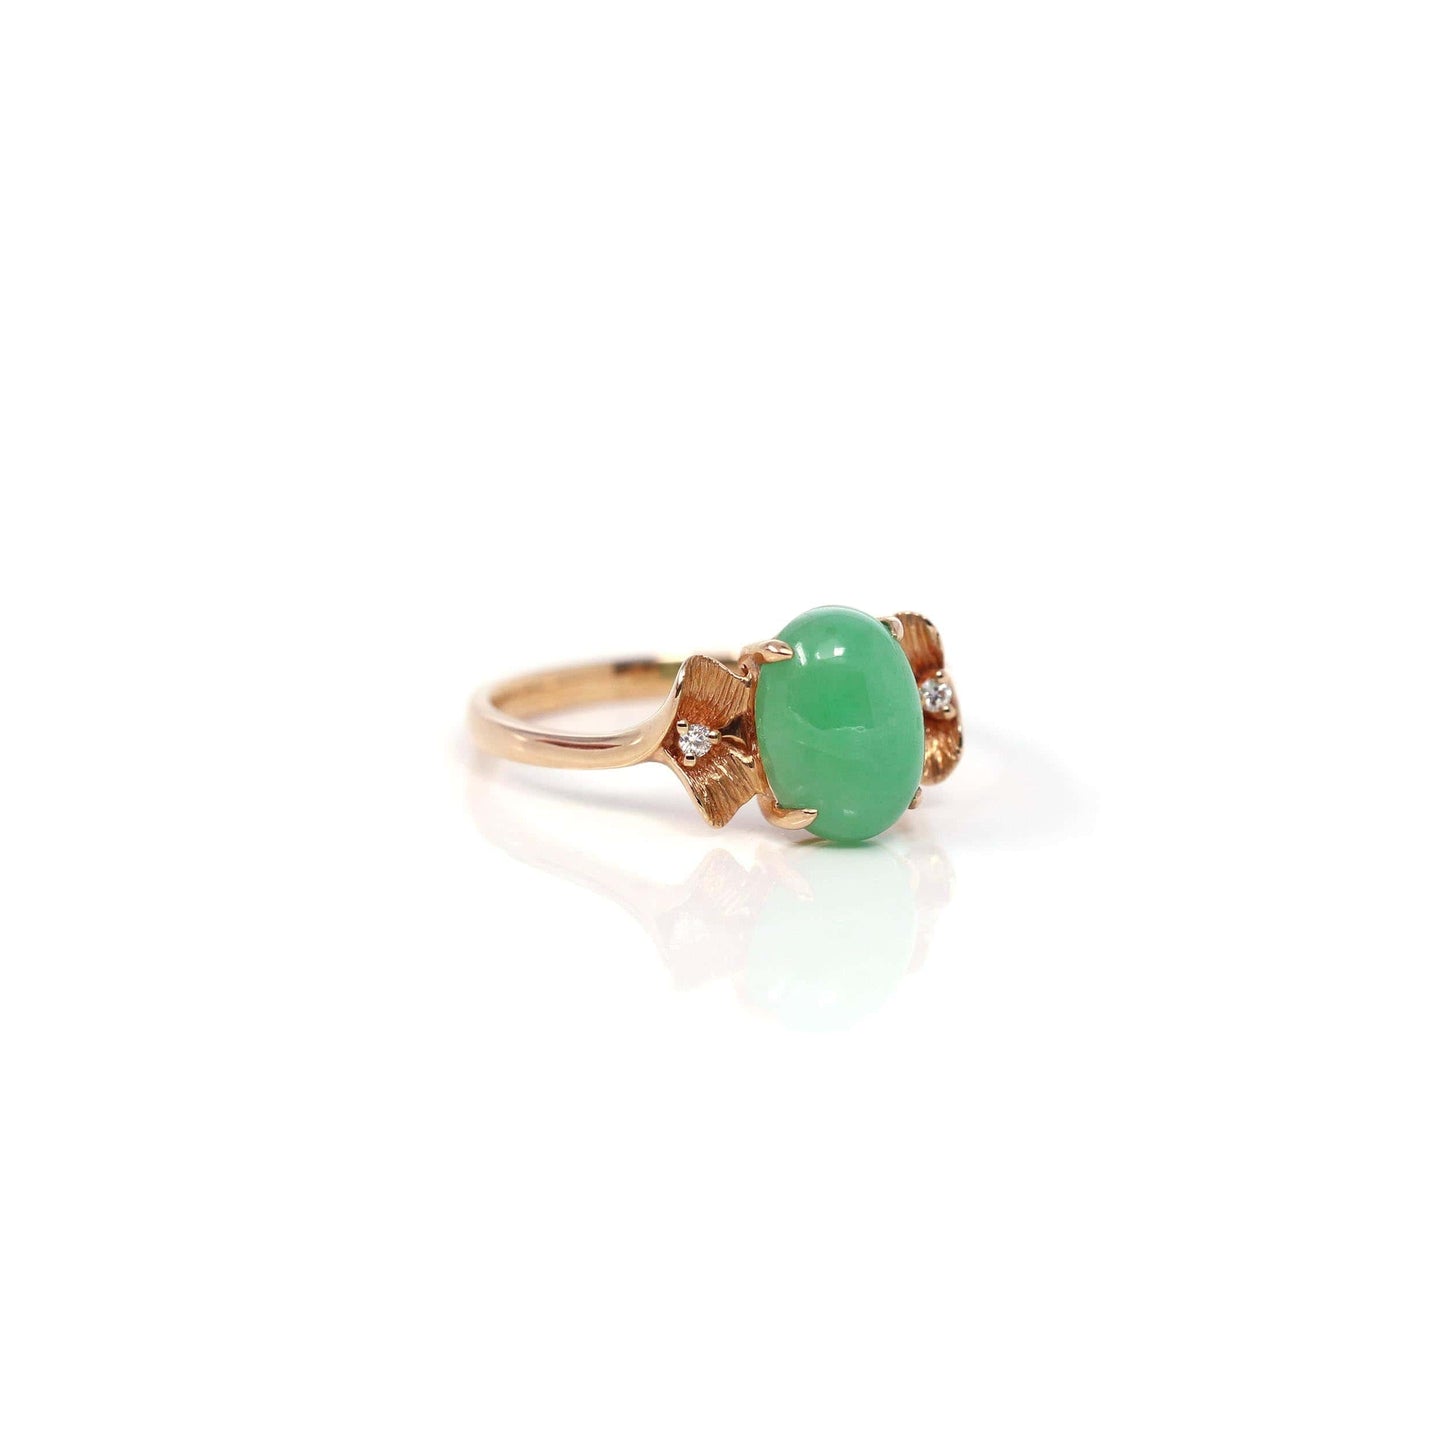 RealJade® Co. "Aretha" 18k Rose Gold Natural Imperial Jadeite Morning Glory Engagement Ring